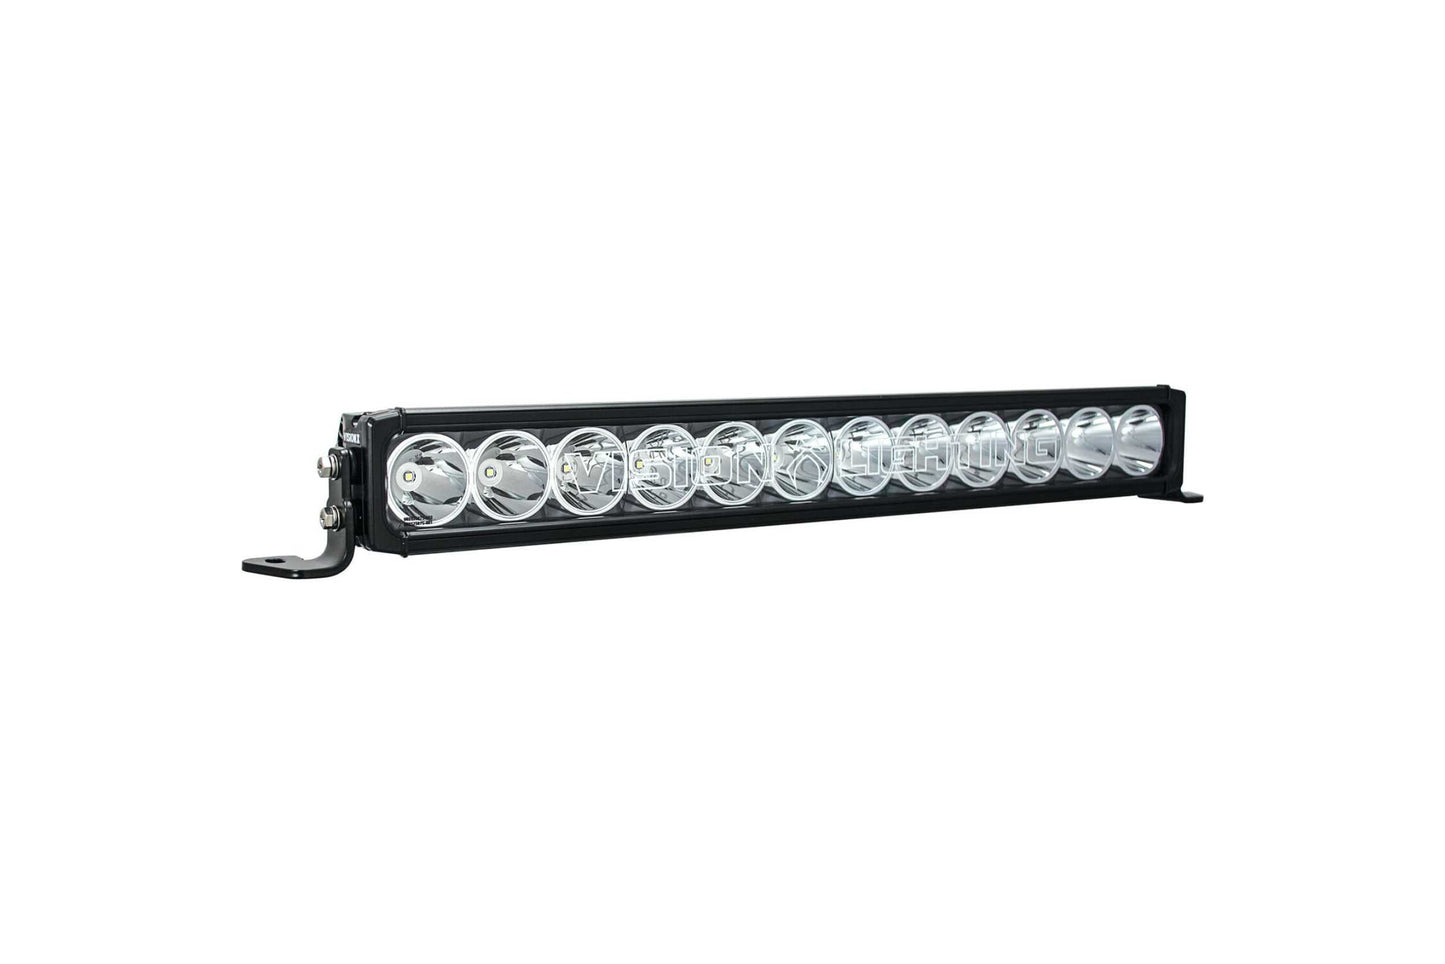 Vision X Light Bar: 6in (3-LED / XPR-S / Xtreme Distance Spot Beam / with Halo)